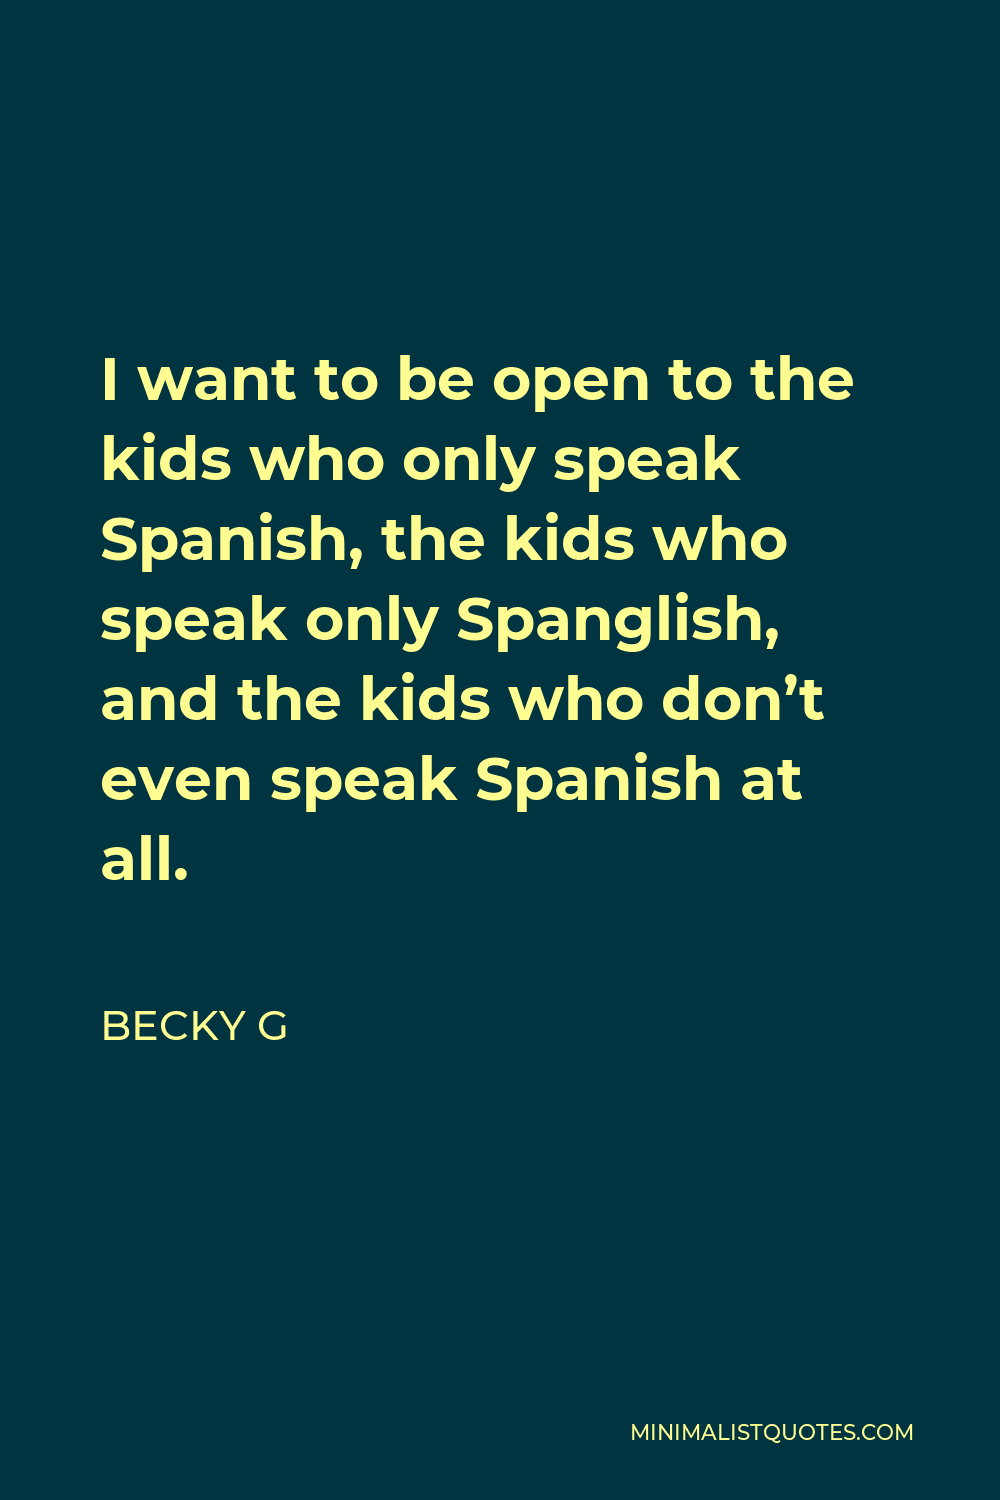 Becky G Quote - I want to be open to the kids who only speak Spanish, the kids who speak only Spanglish, and the kids who don’t even speak Spanish at all.